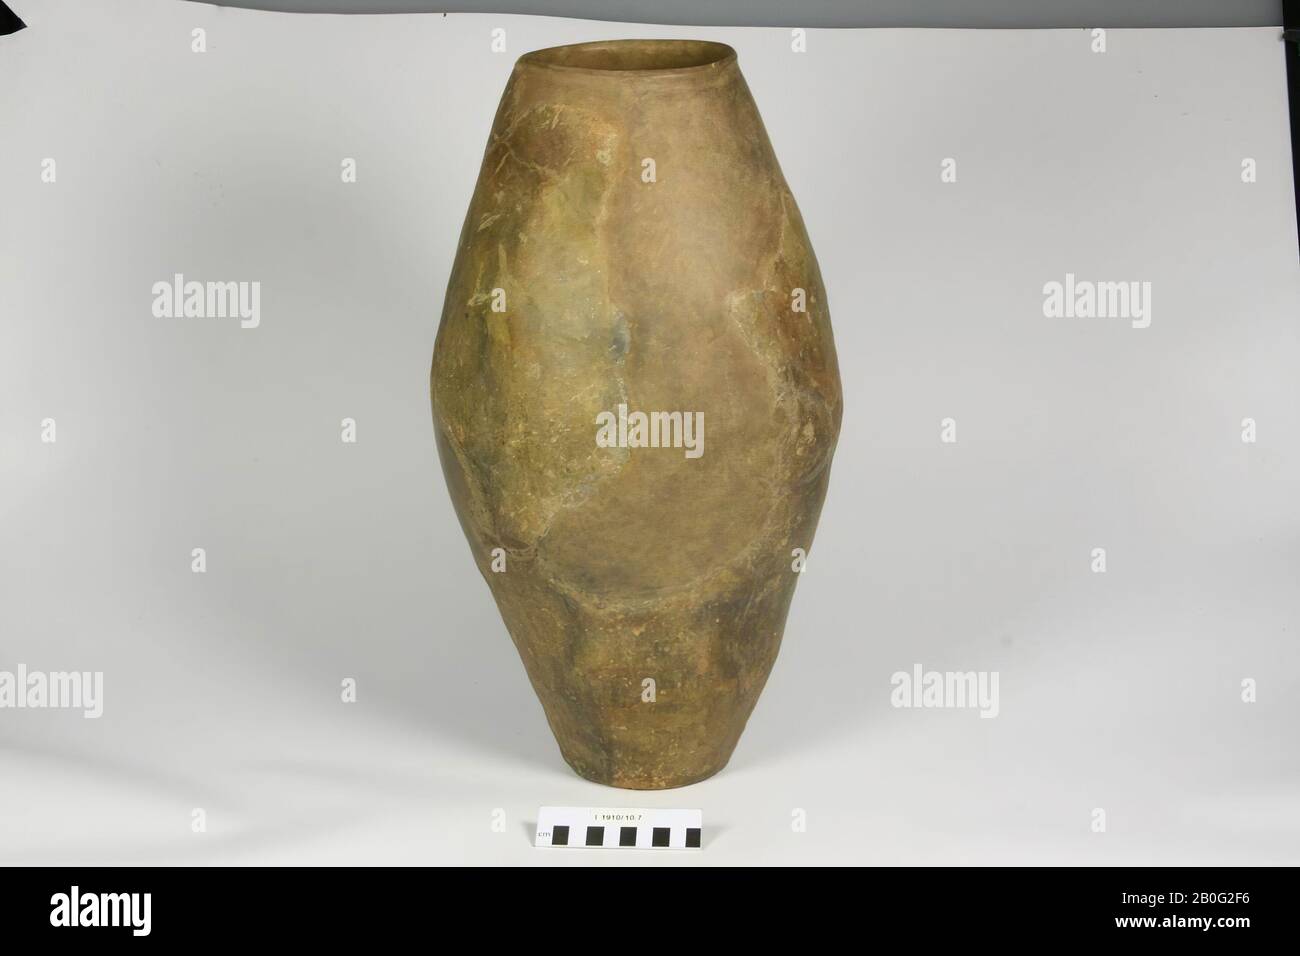 Germanic urn of earthenware. Old bondings and additions, surface cracks. Contains cremated residues, urn, earthenware, h: 46 cm, diam: 25 cm, prehistory -800 Stock Photo